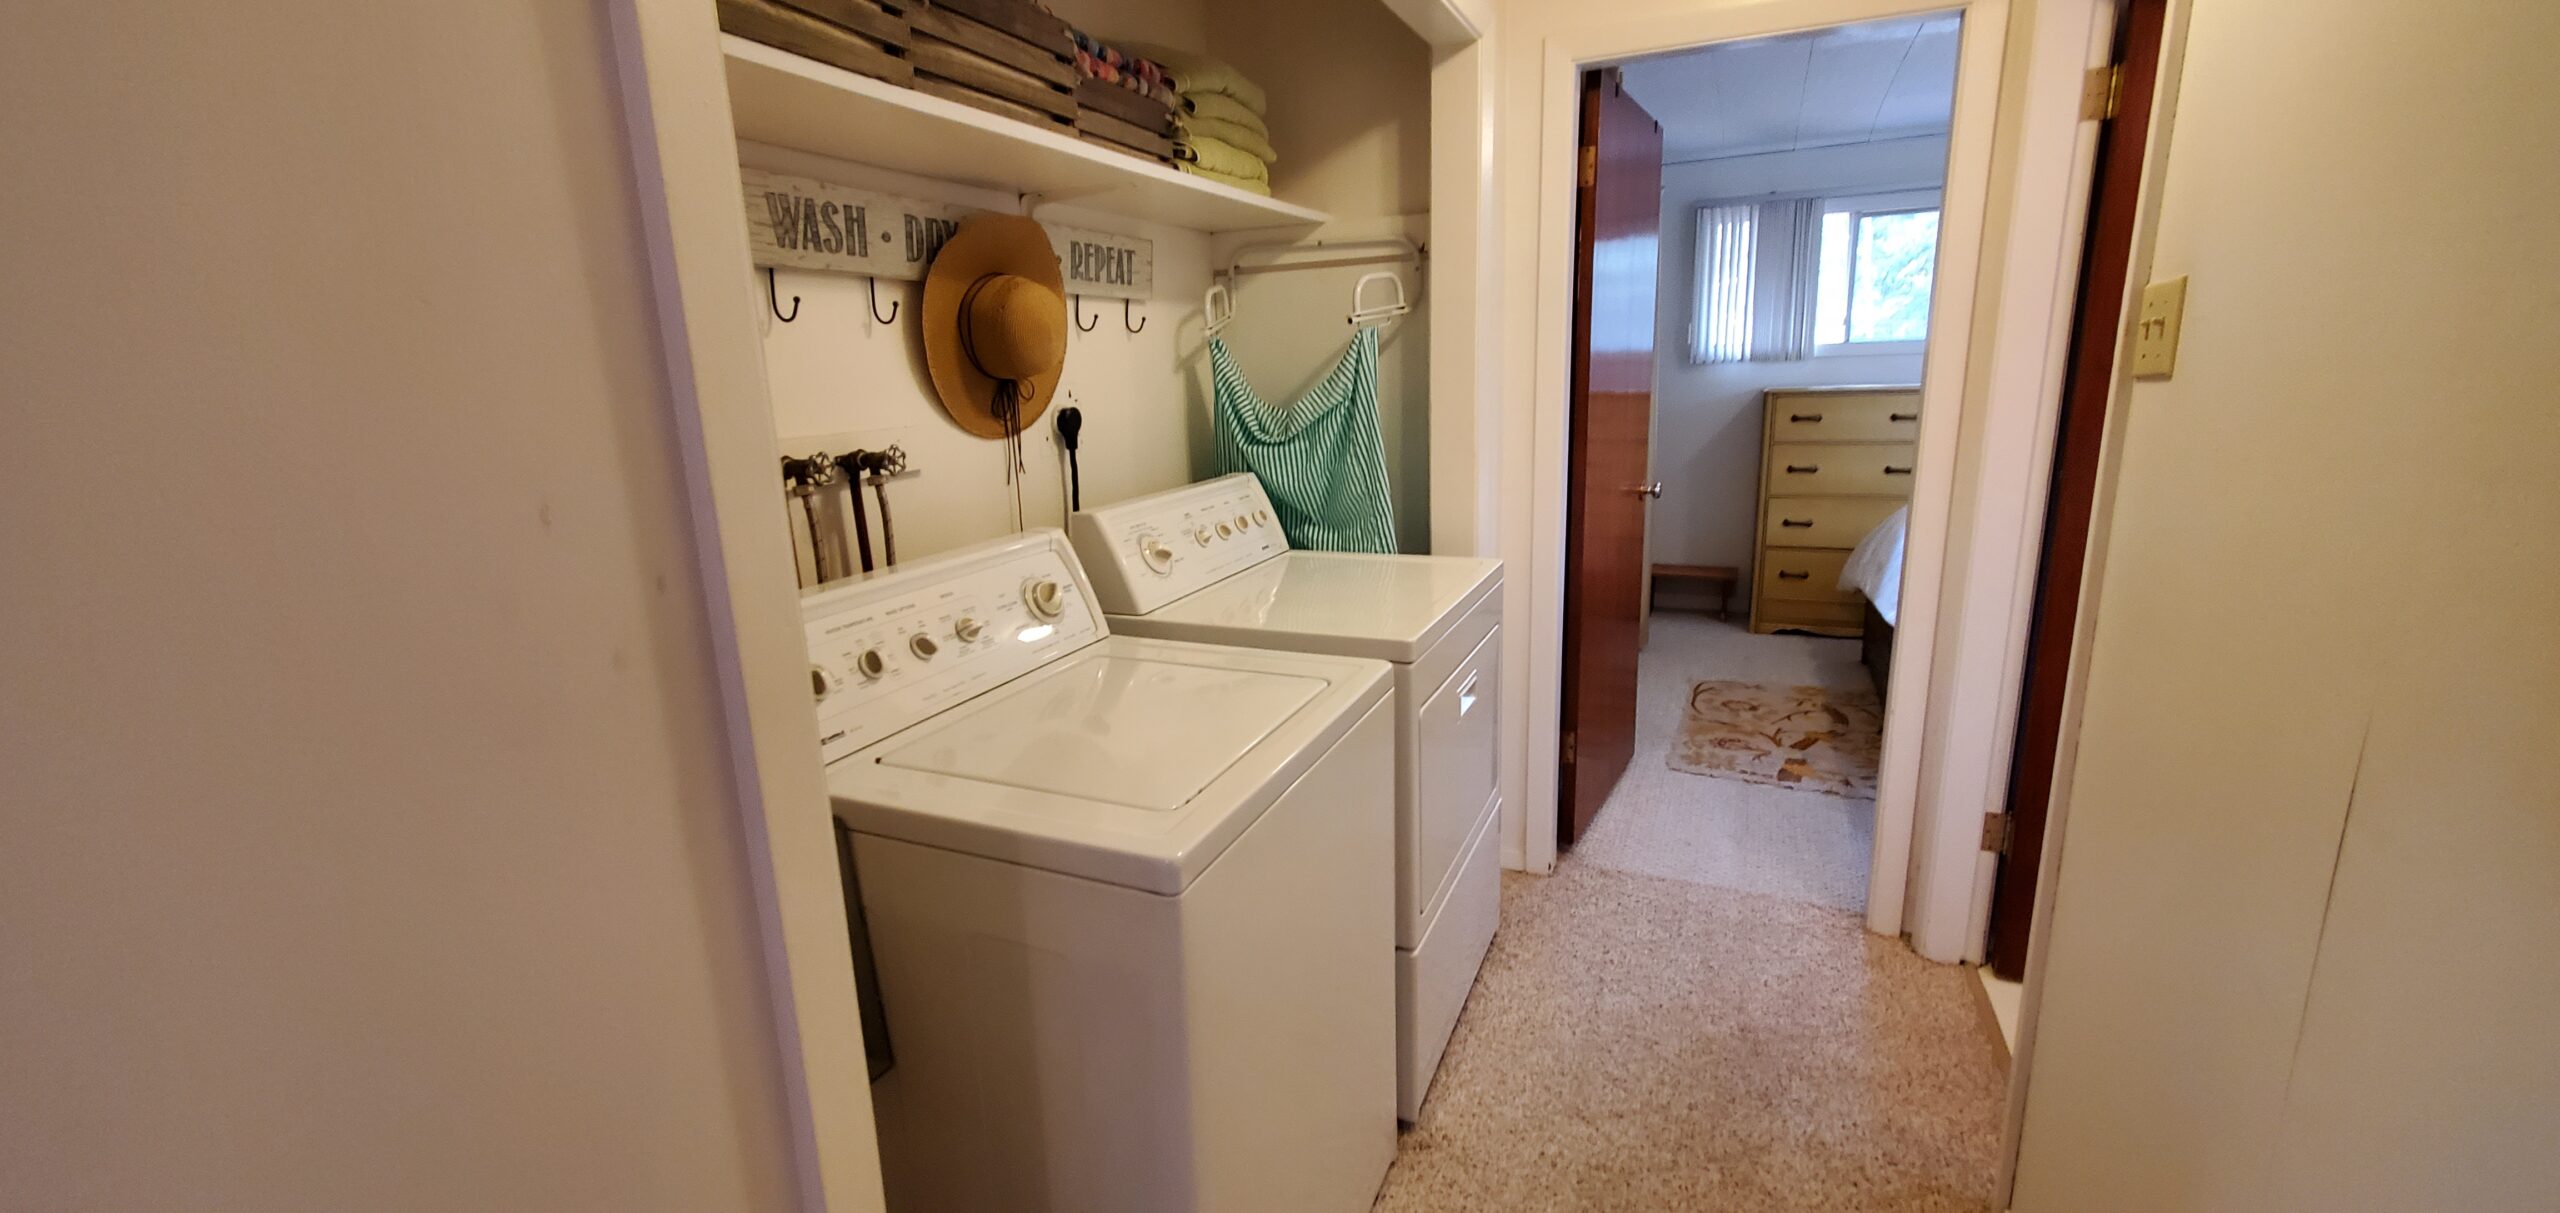 A washing machine and a dryer sit side by side in a hallway alcove. Hooks hang on the wall above them, with a shelf above the hooks.